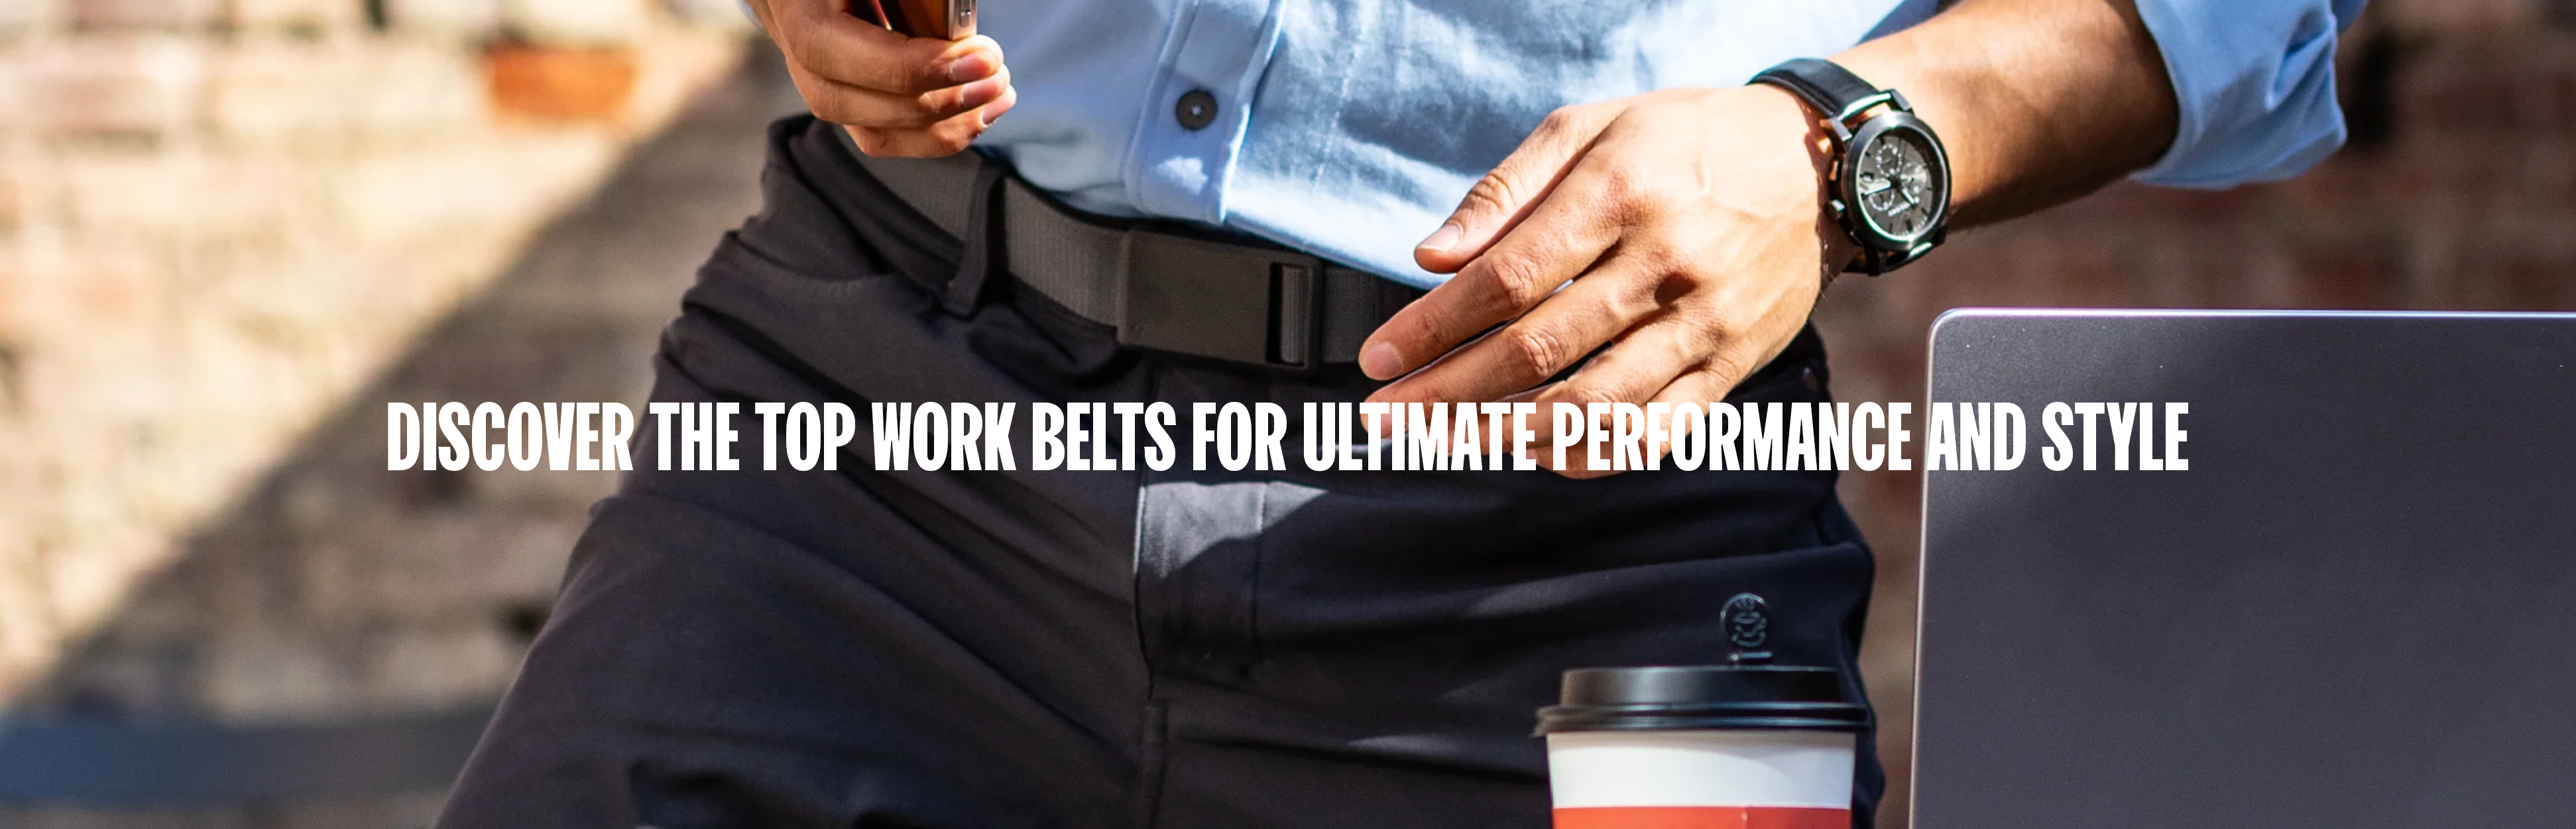 Discover the Top Work Belts for Ultimate Performance and Style